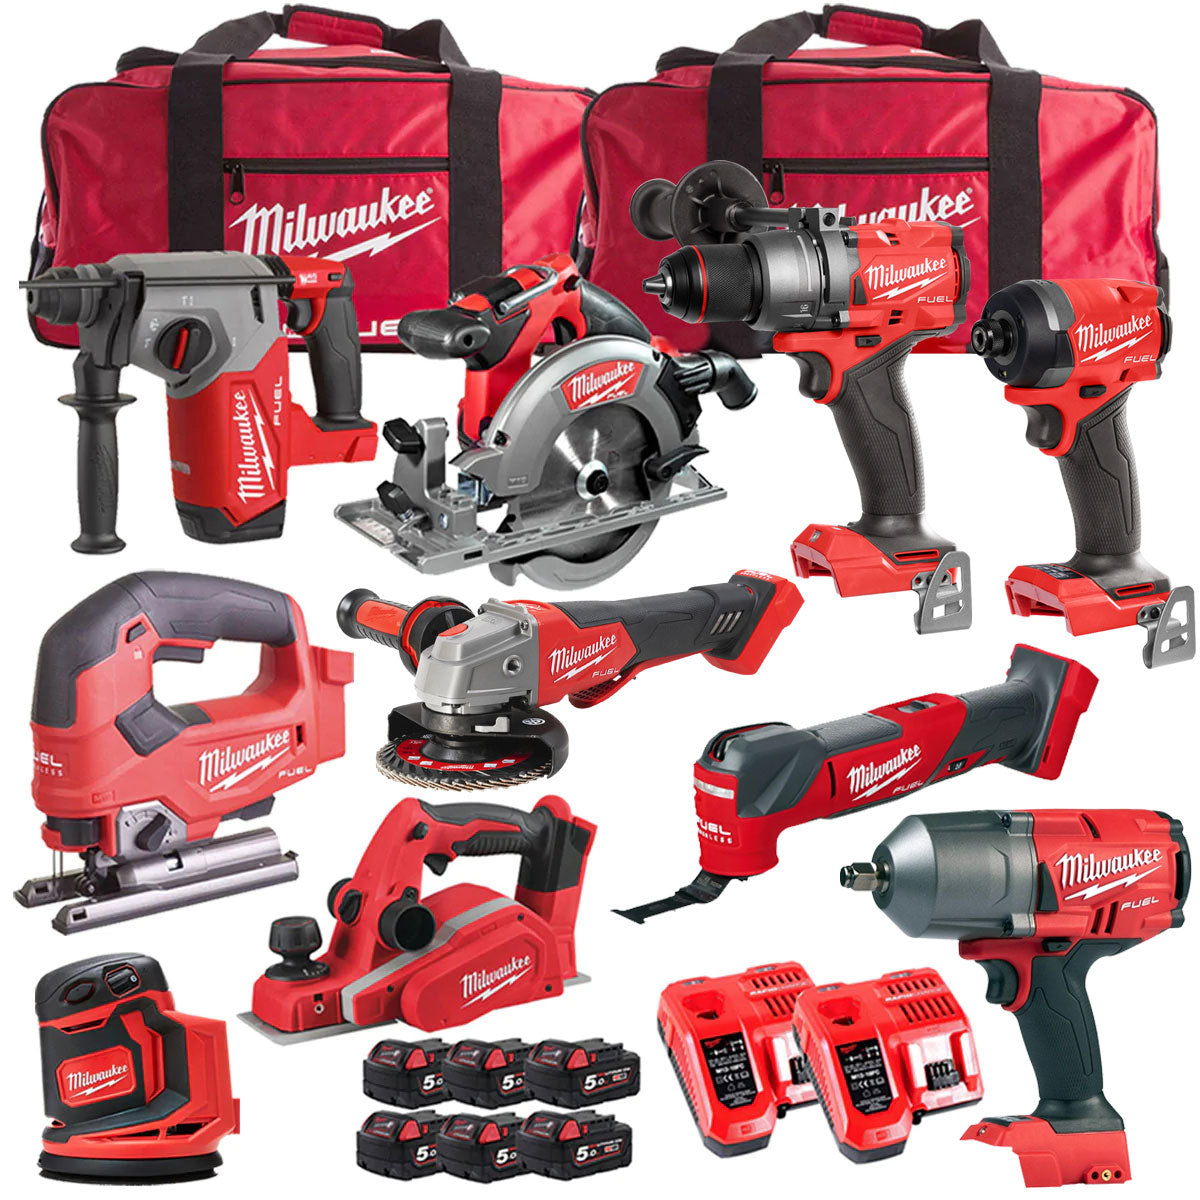 Milwaukee 18V Cordless 10 Piece Tool Kit with 6 x 5.0Ah Batteries & Charger in Bag T4TKIT-510